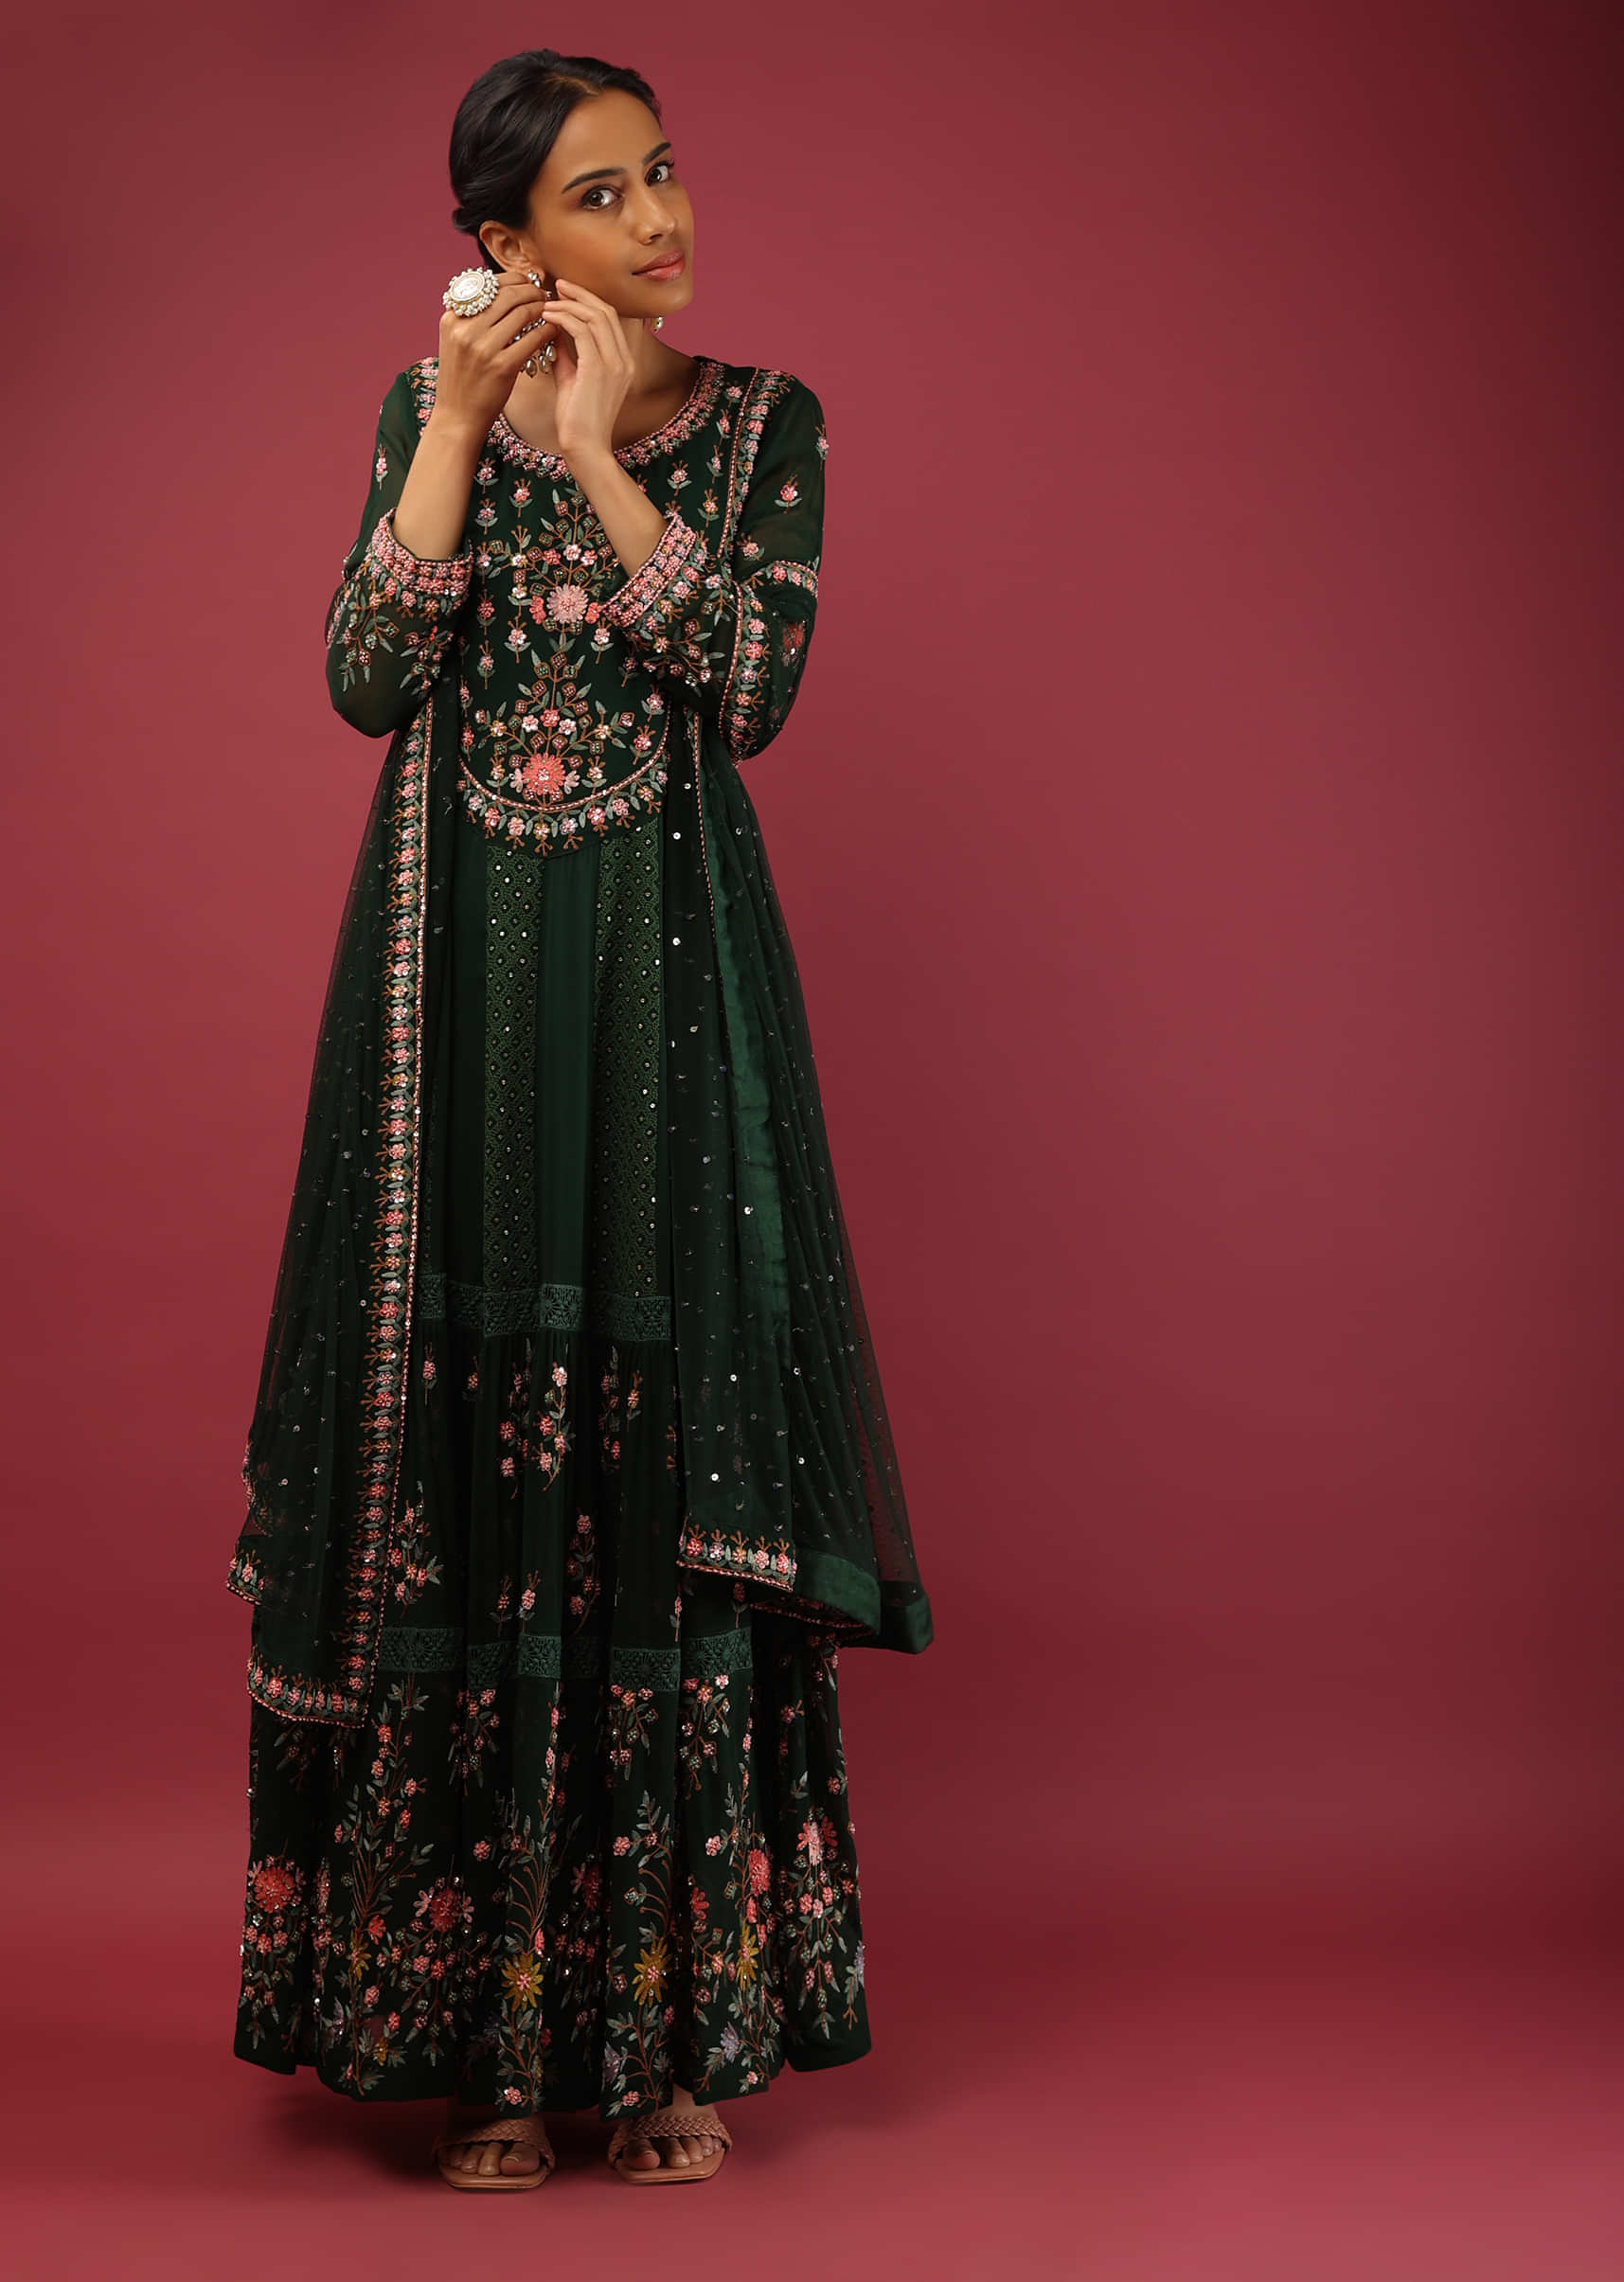 Bottle Green Anarkali Suit In Georgette With Organza Tiers Adorned In Colorful Resham Embroidery In Floral Motifs  